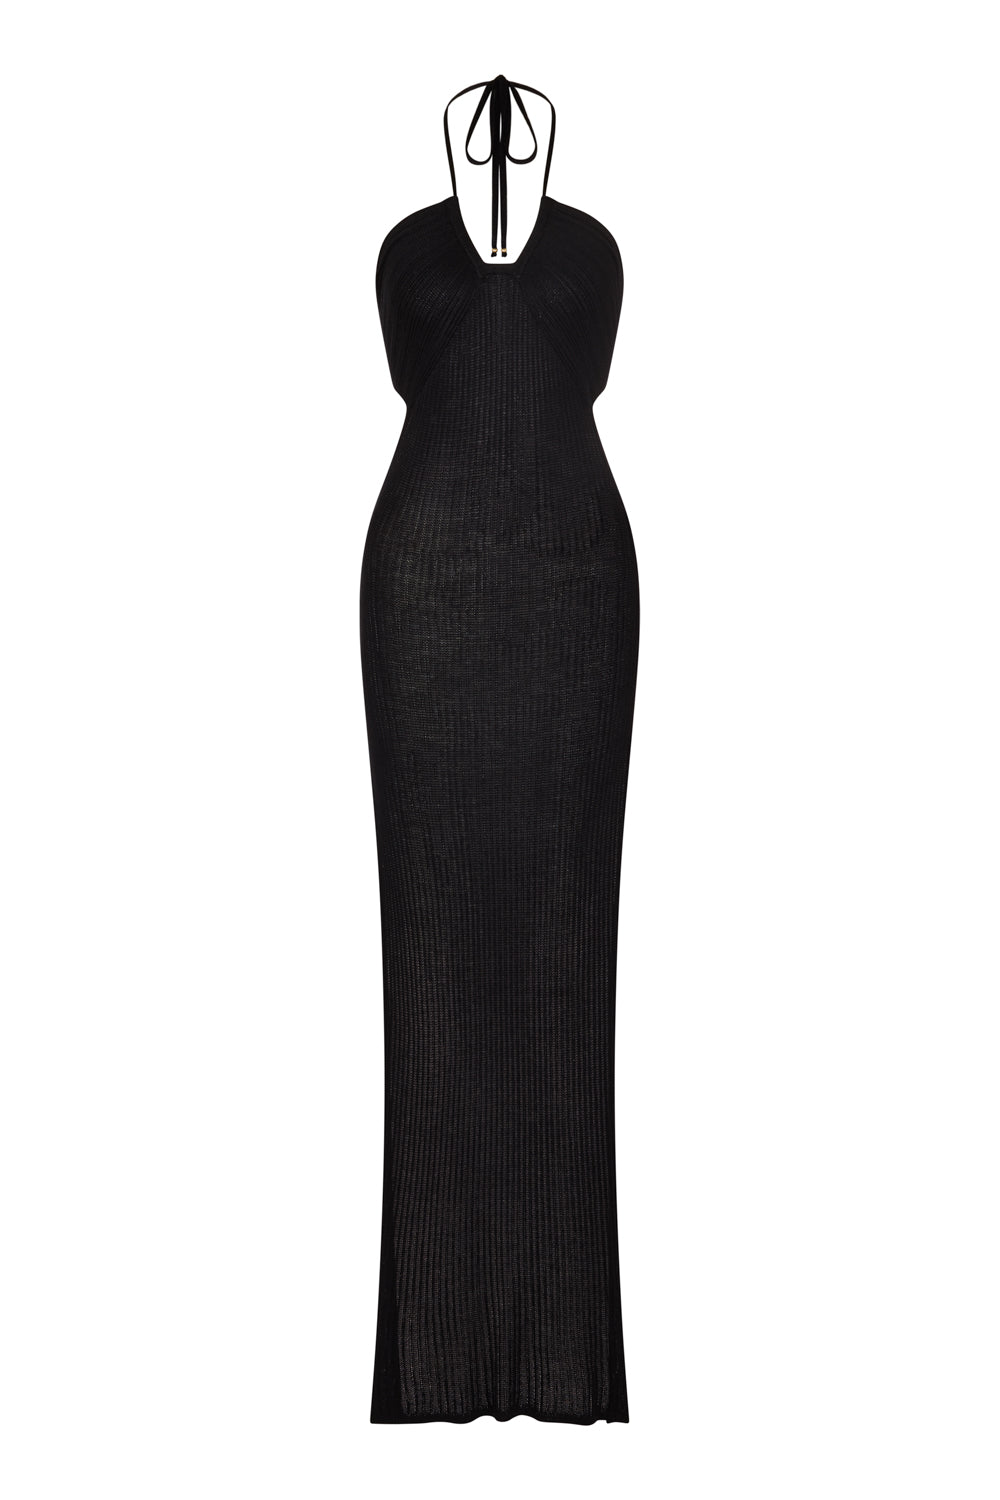 flook the label sia dress black knit product image front 